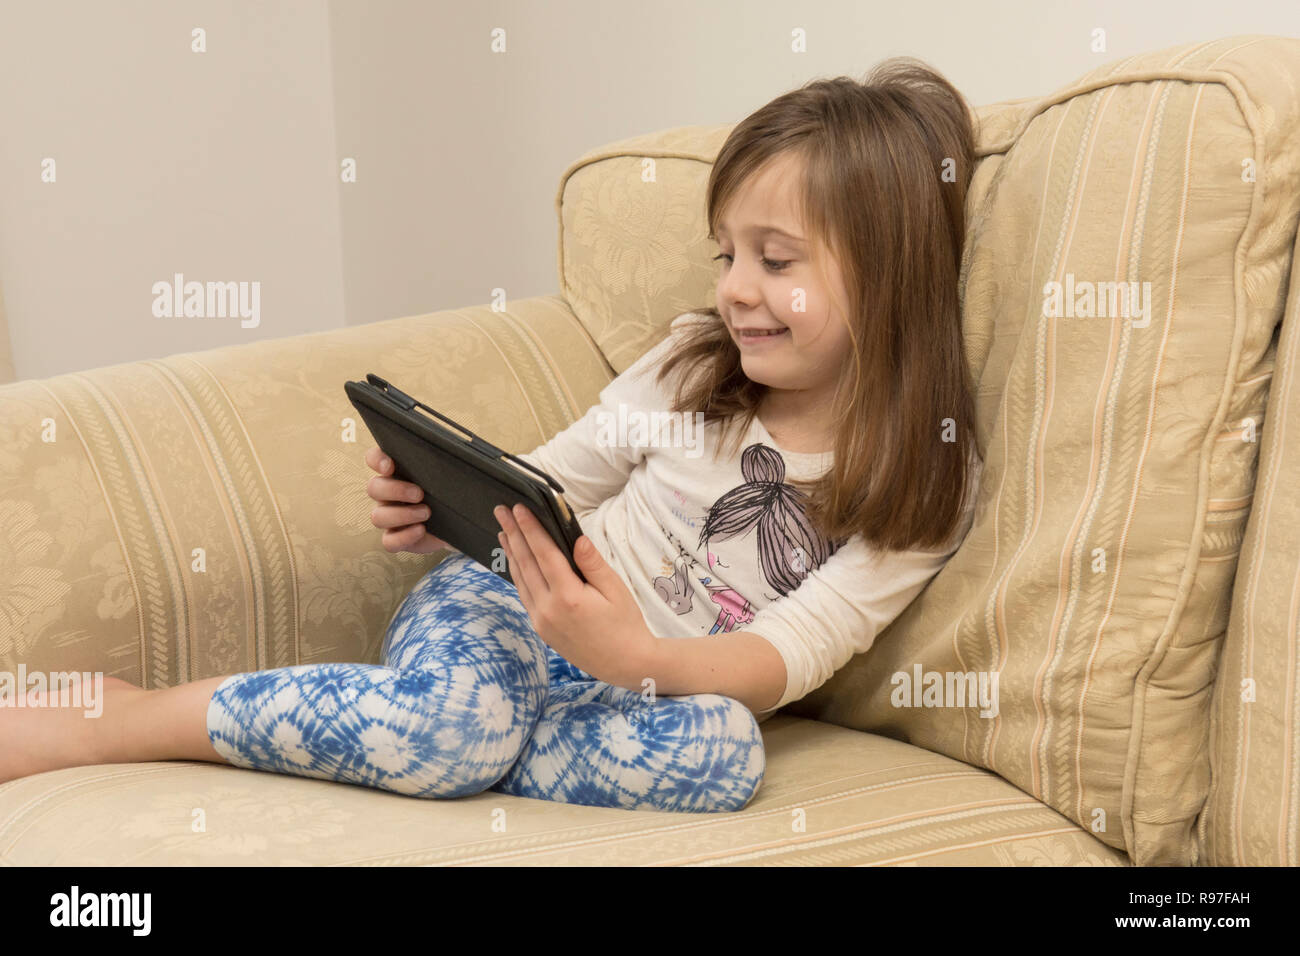 young girl laying of a sofa playing with an iPad, digital device, tablet, electronic media, social media, six-year-old. Stock Photo